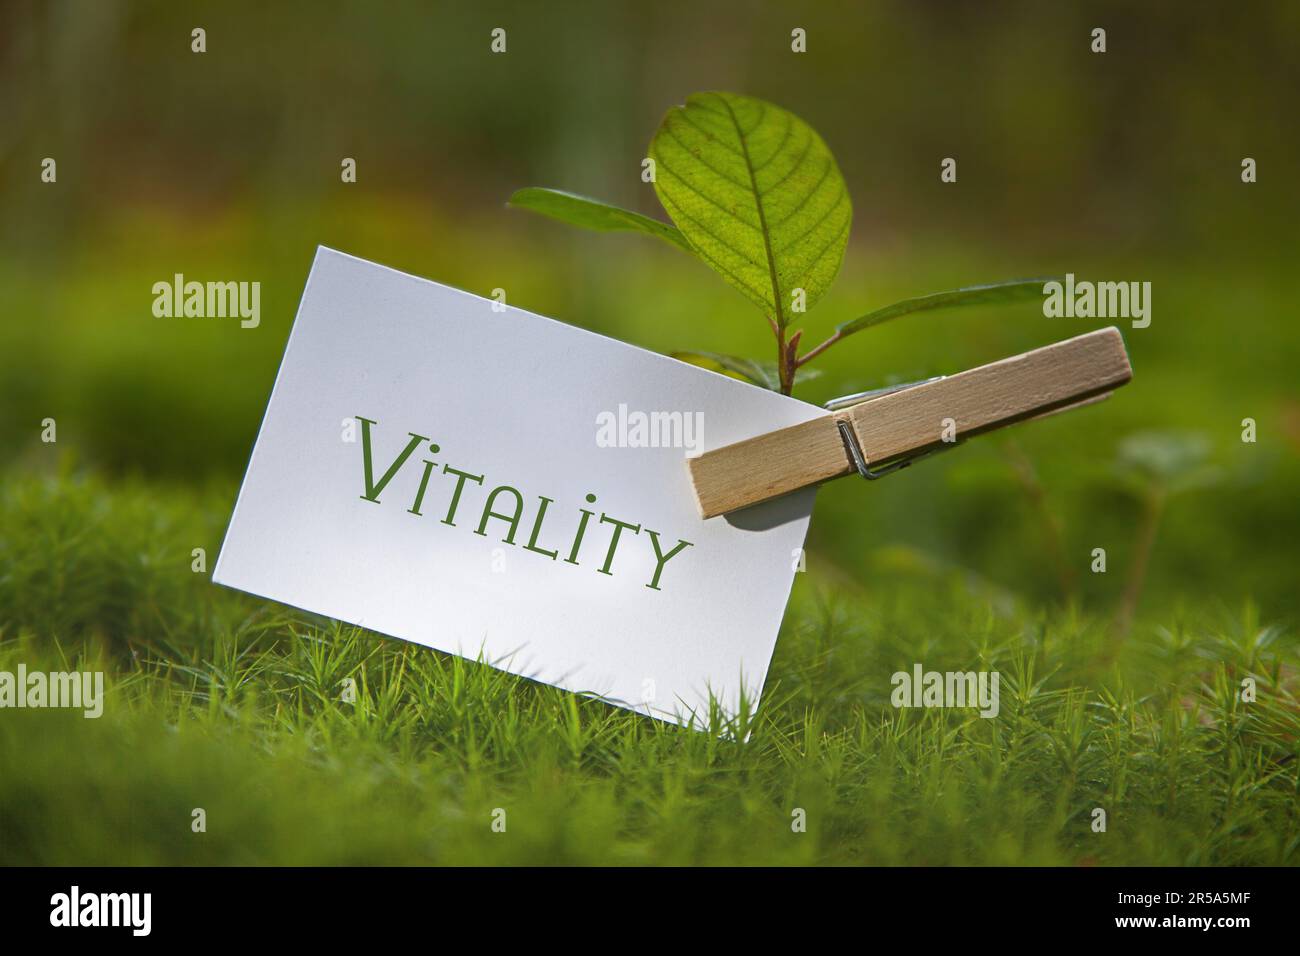 seedling on a meadow with piece of paper lettering Vitality Stock Photo